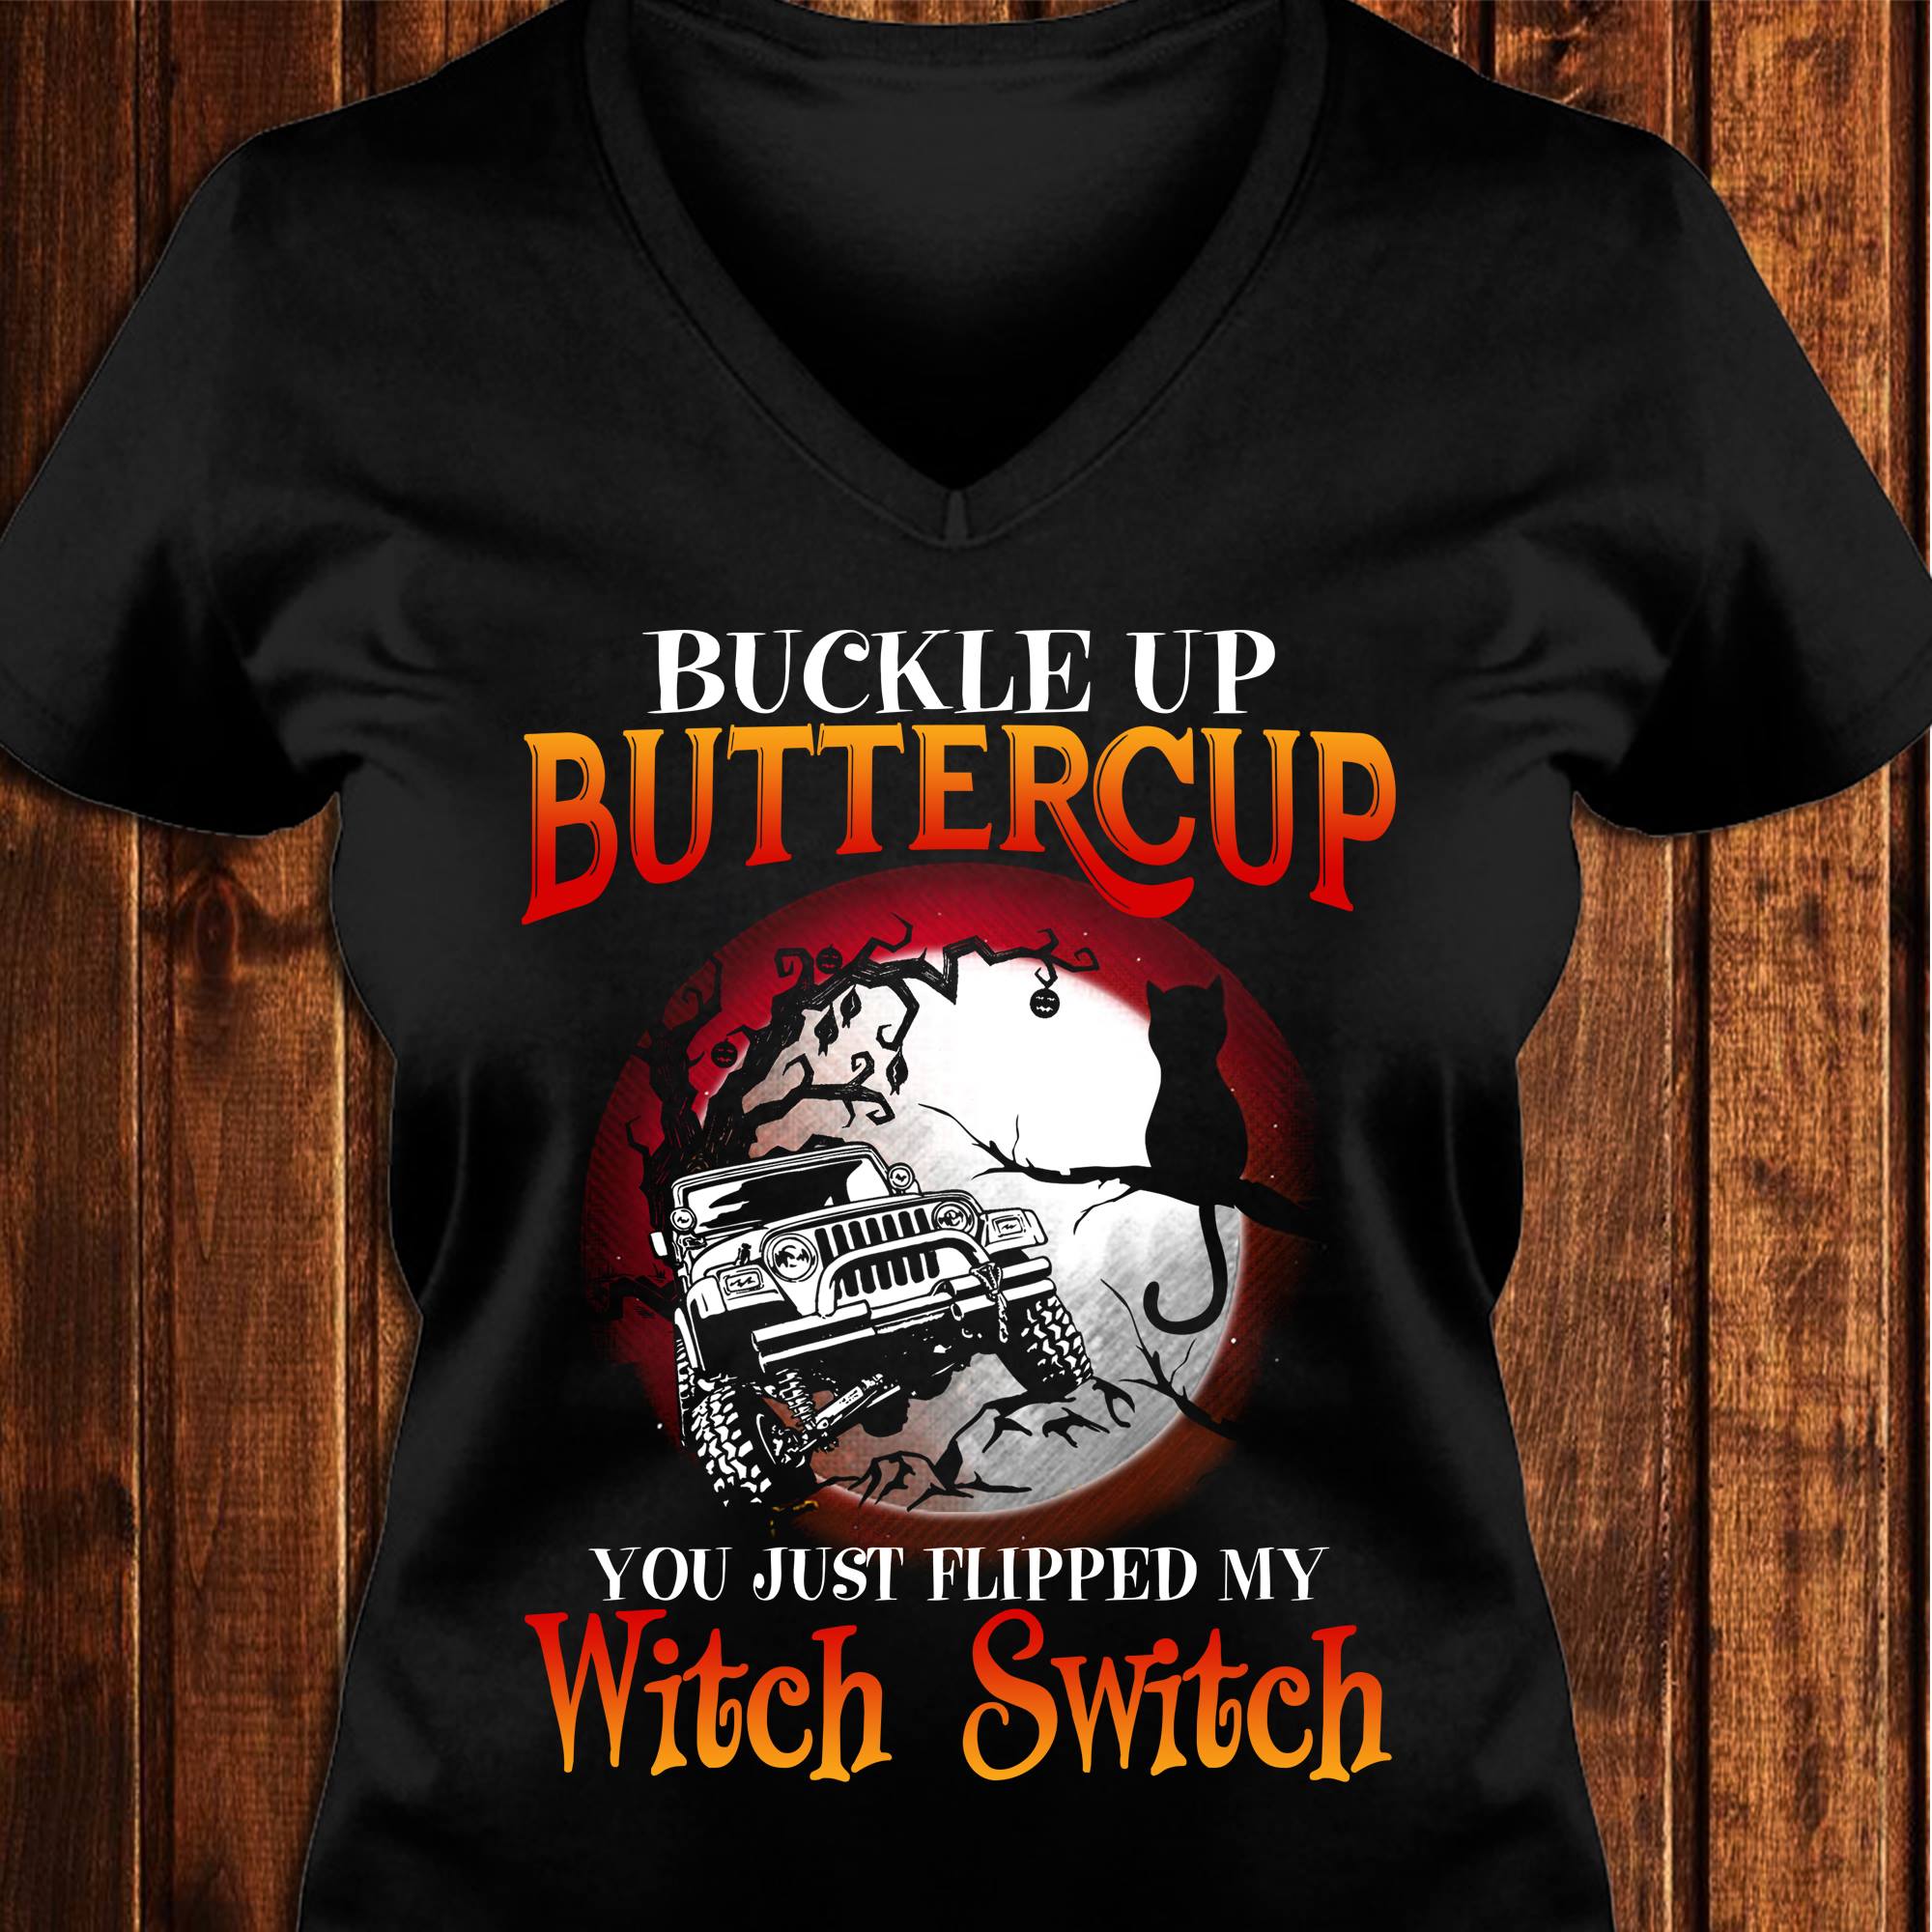 Buckle Up Buttercup Car T-shirt and Hoodie 0823